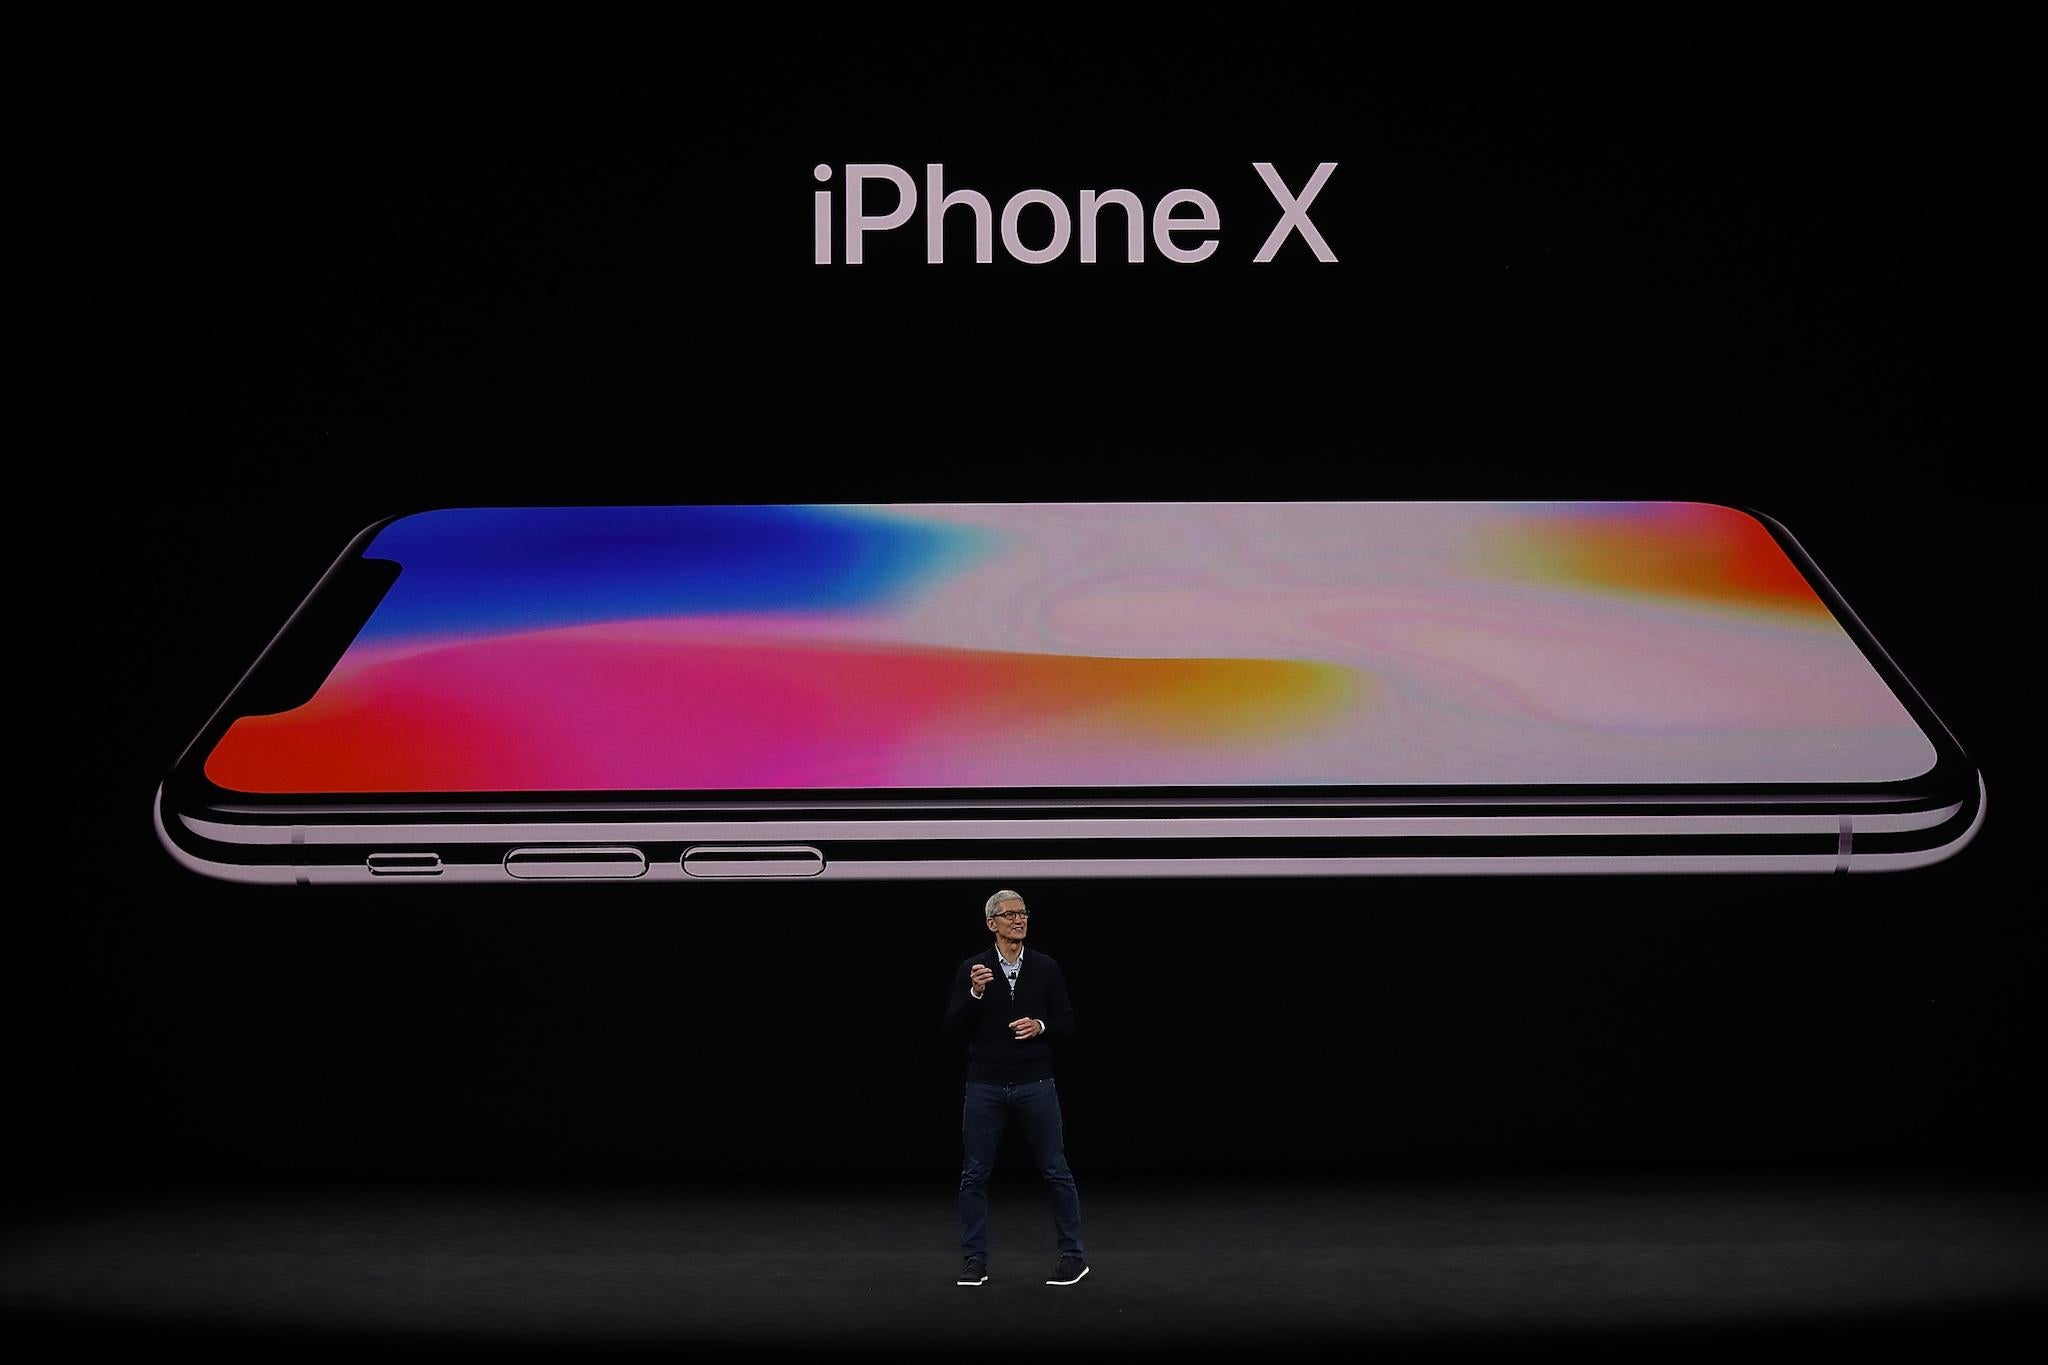 Apple CEO Tim Cook announces the new iPhone X during an Apple special event at the Steve Jobs Theatre on the Apple Park campus on September 12, 2017 in Cupertino, California